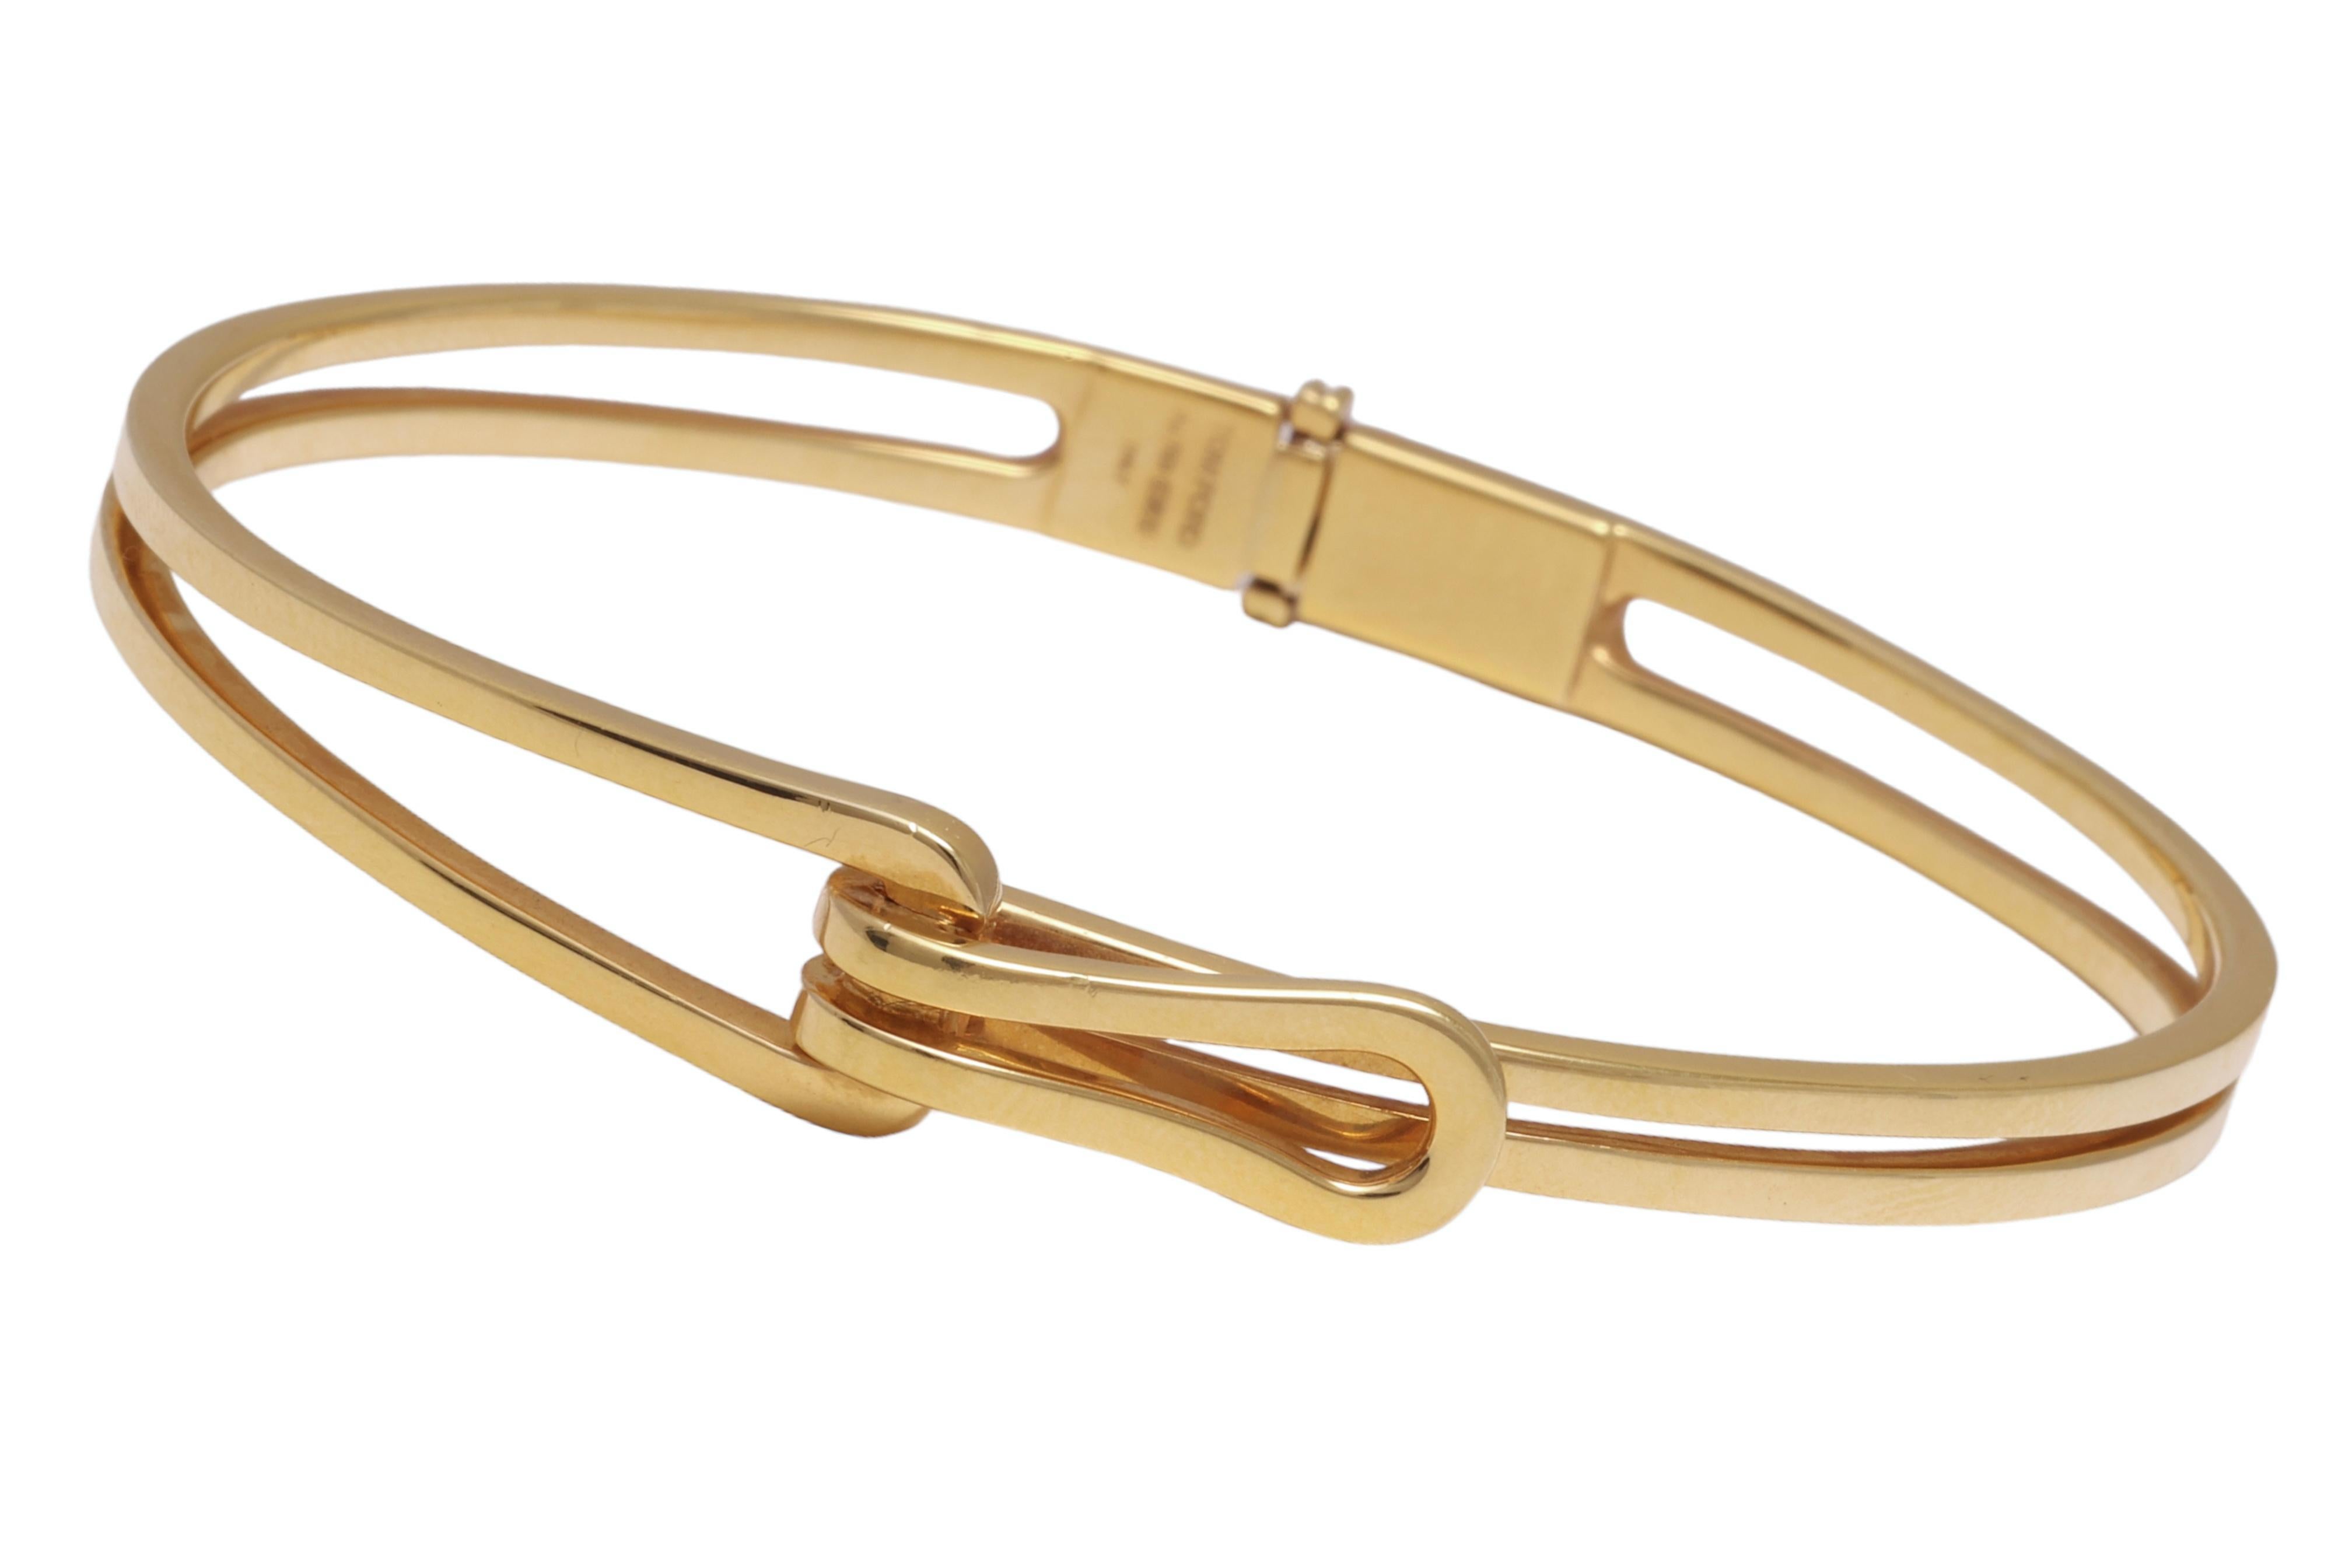 18 kt. Yellow Gold Tom Ford Interlocked Bracelet, Comes in the original Tom Ford Box

Bracelet:
Material: 18 kt. yellow gold
Measurements: Will max fit a  19 cm wrist
Total weight: 28.7 gram / 1.015 oz / 18.5 dwt

Possible to buy the matching ring